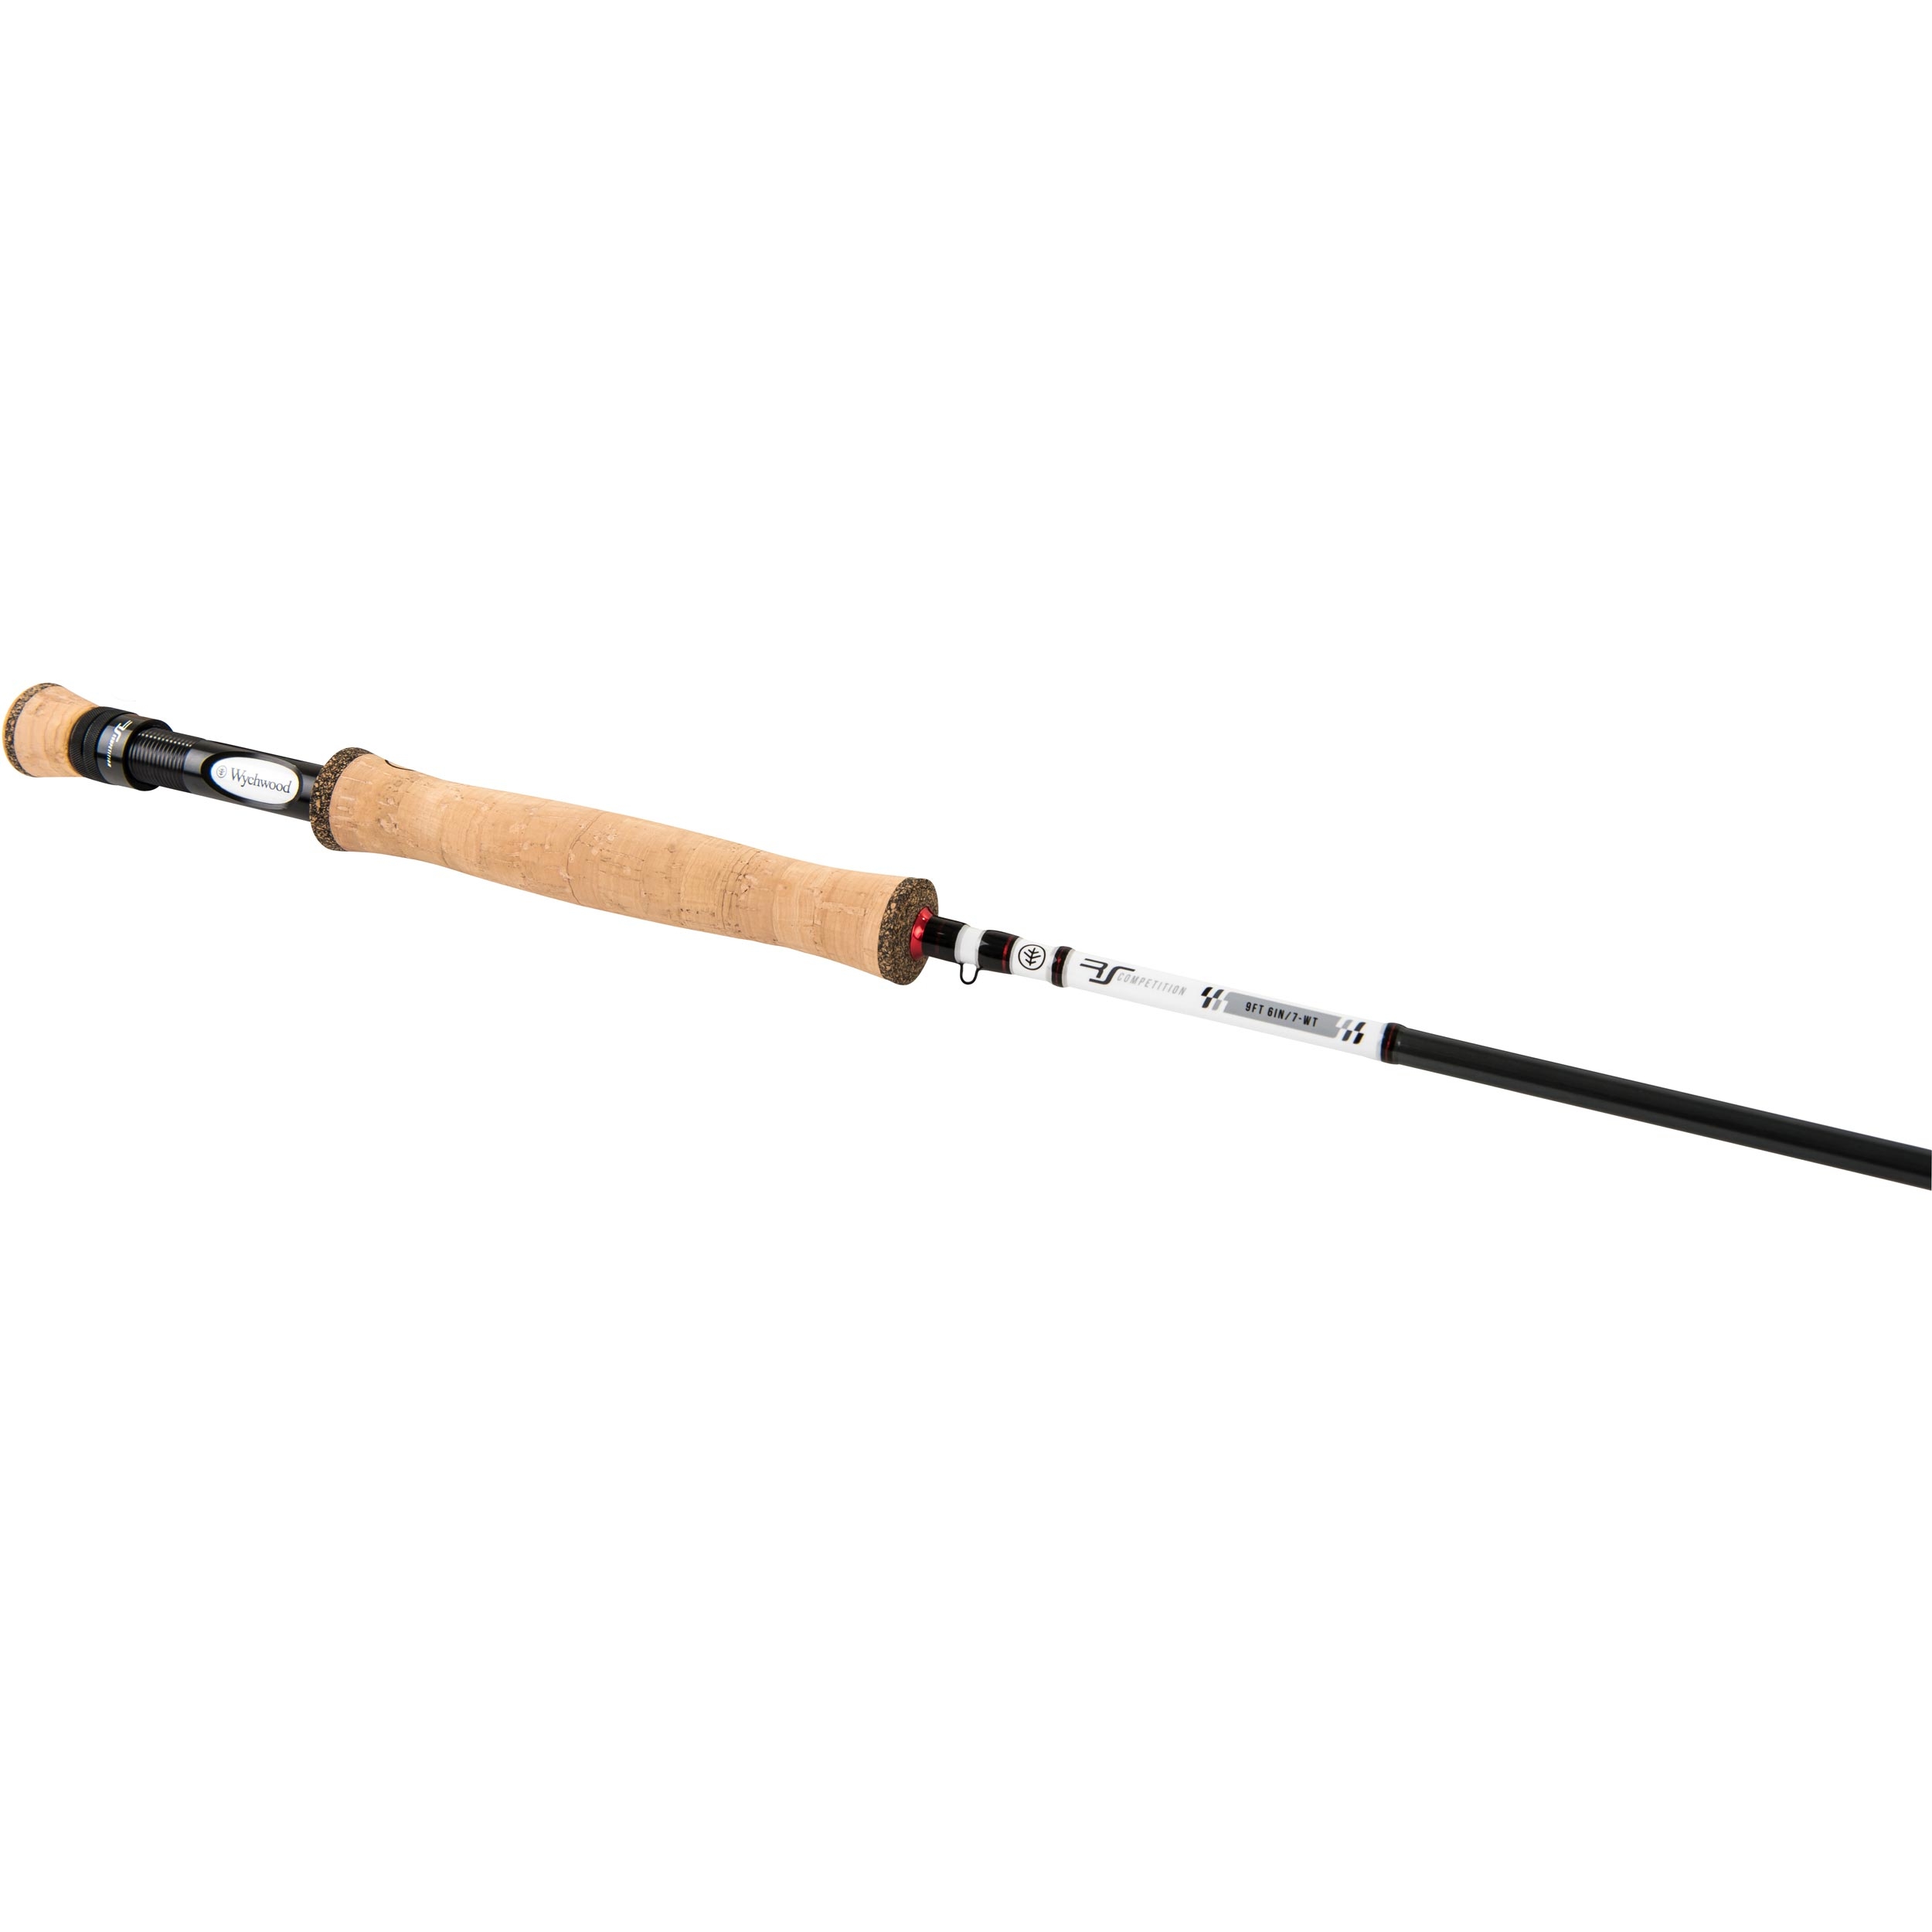 https://cdn.anglingactive.co.uk/media/catalog/product/cache/c7a5695839b539f20c8015776a05748c/w/y/wychwood_rs_competition_fly_rod_-_single_handed_trout_fly_fishing_rods.jpg